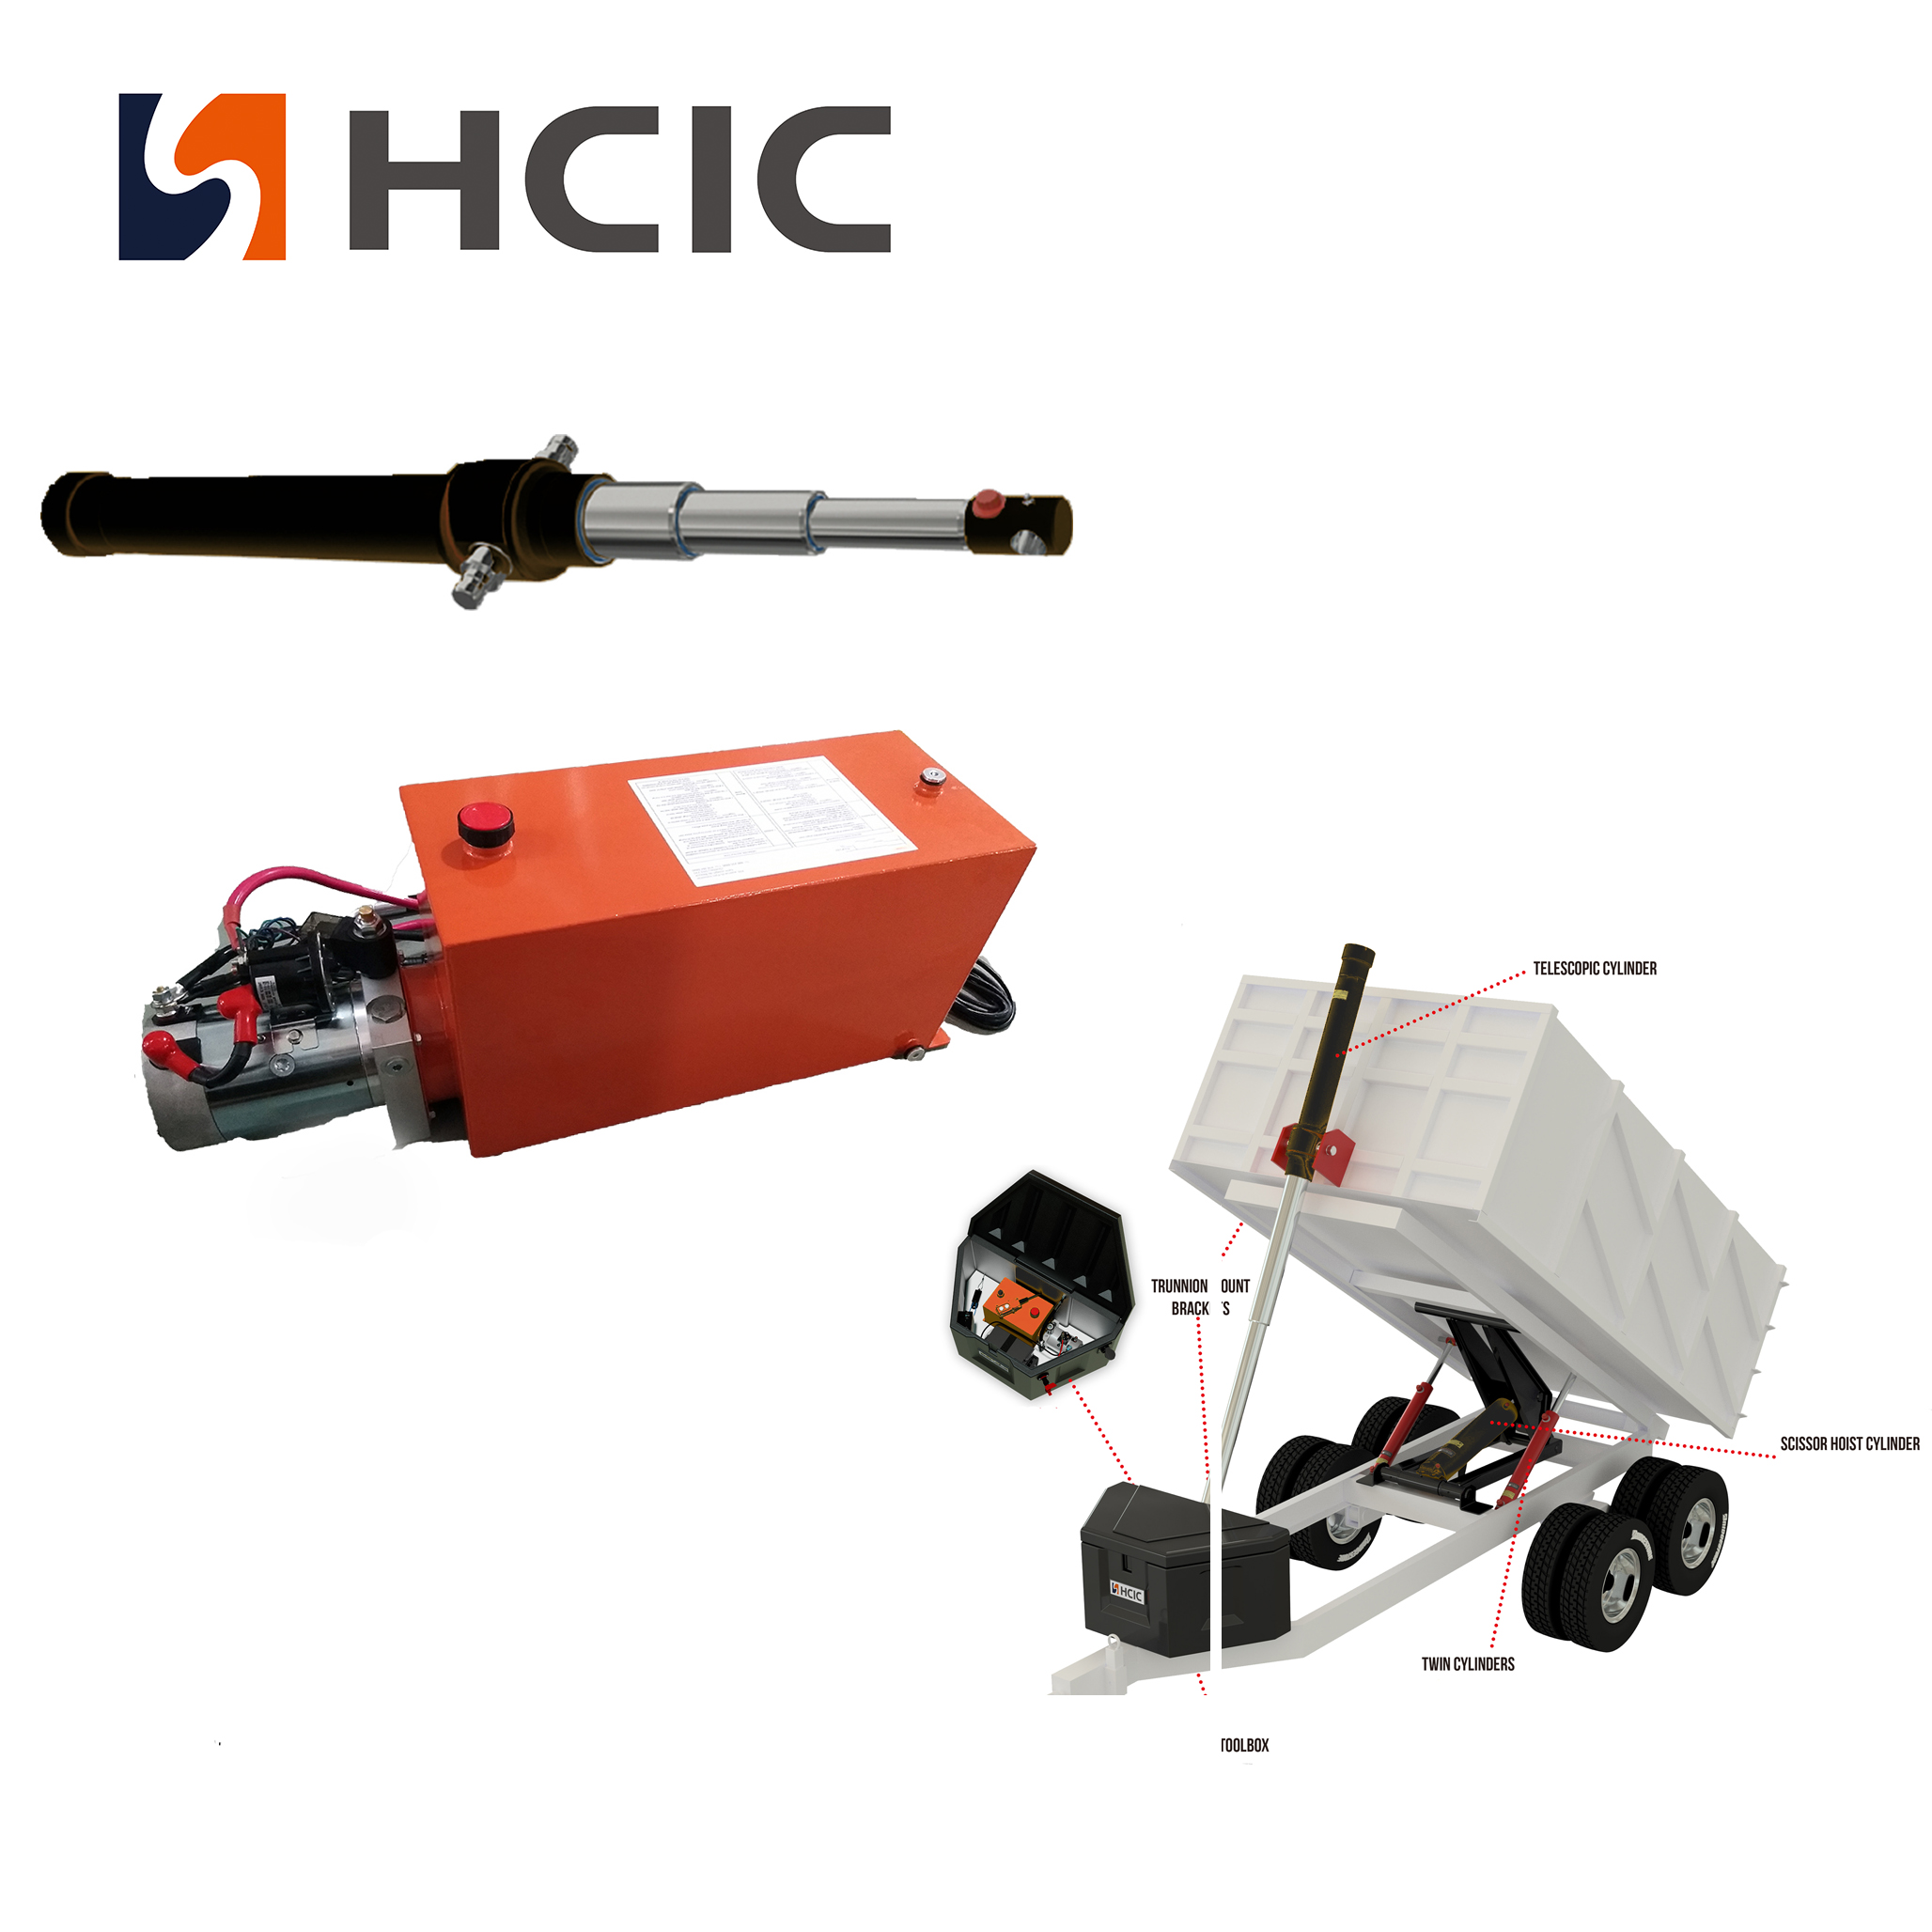 HCIC Partners with Waste Management Industry Leaders to Develop Green Hydraulic Cylinders